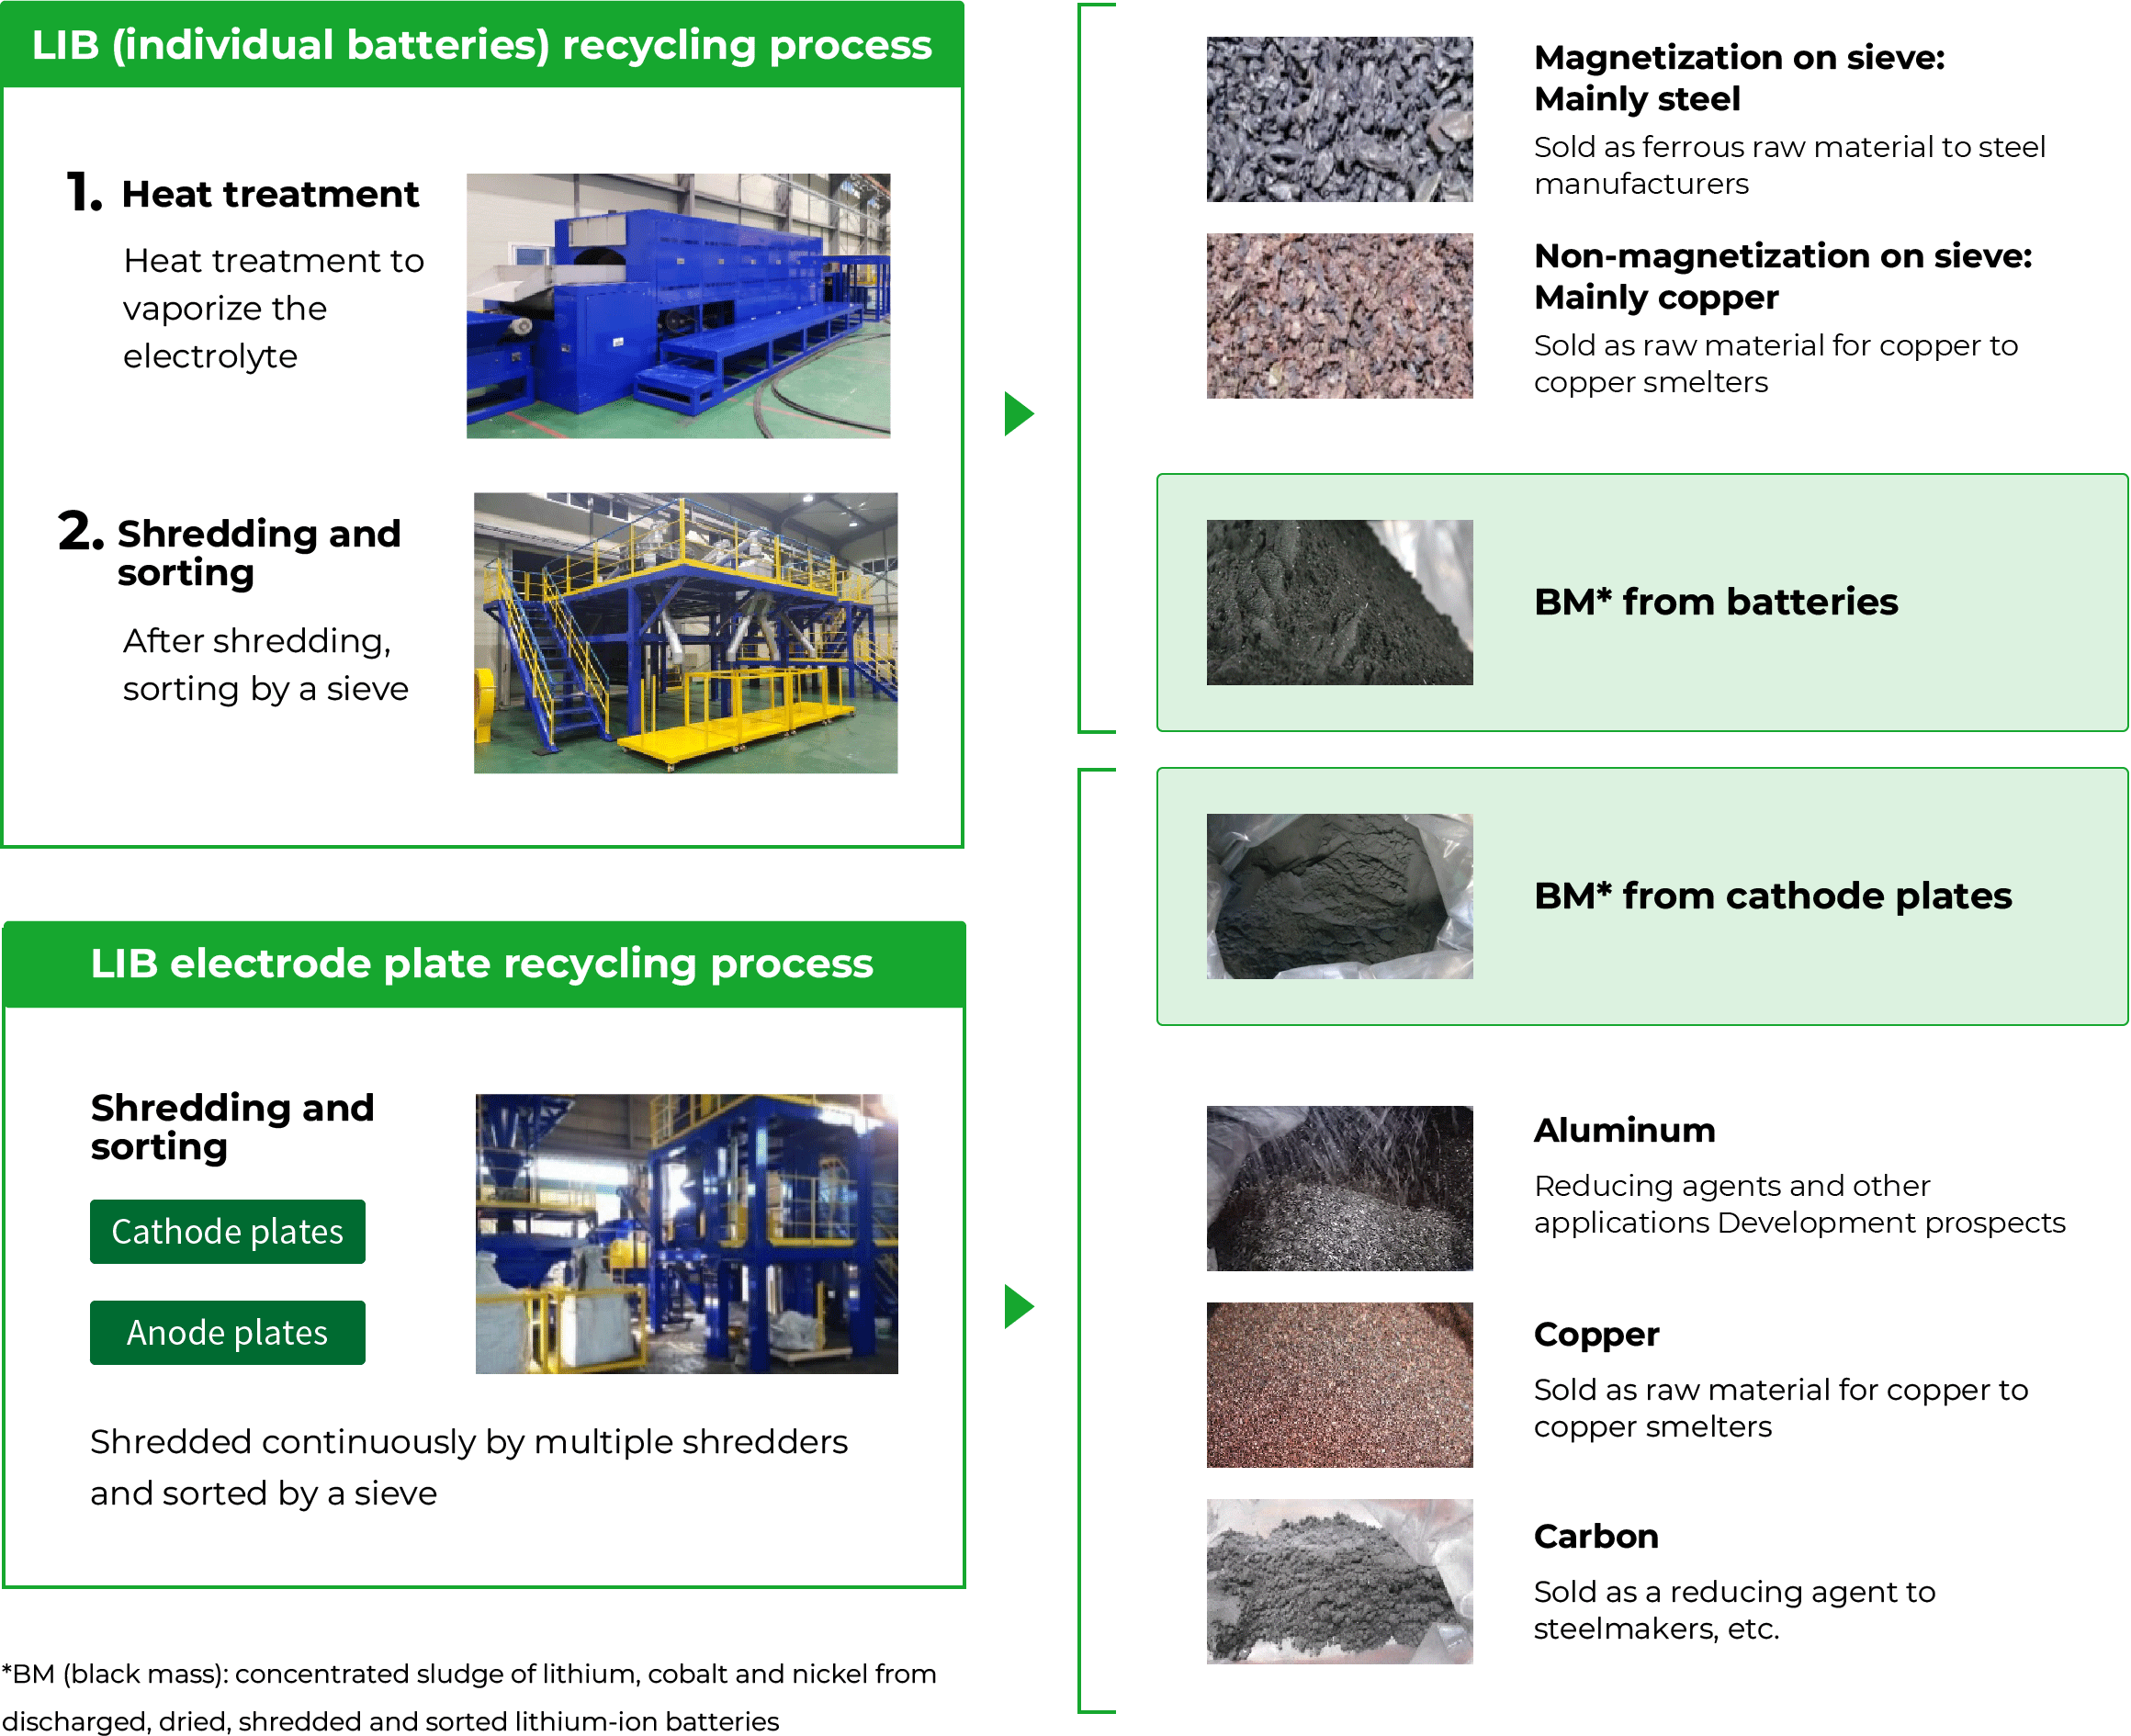 LIB recycling business developed by VOLTA